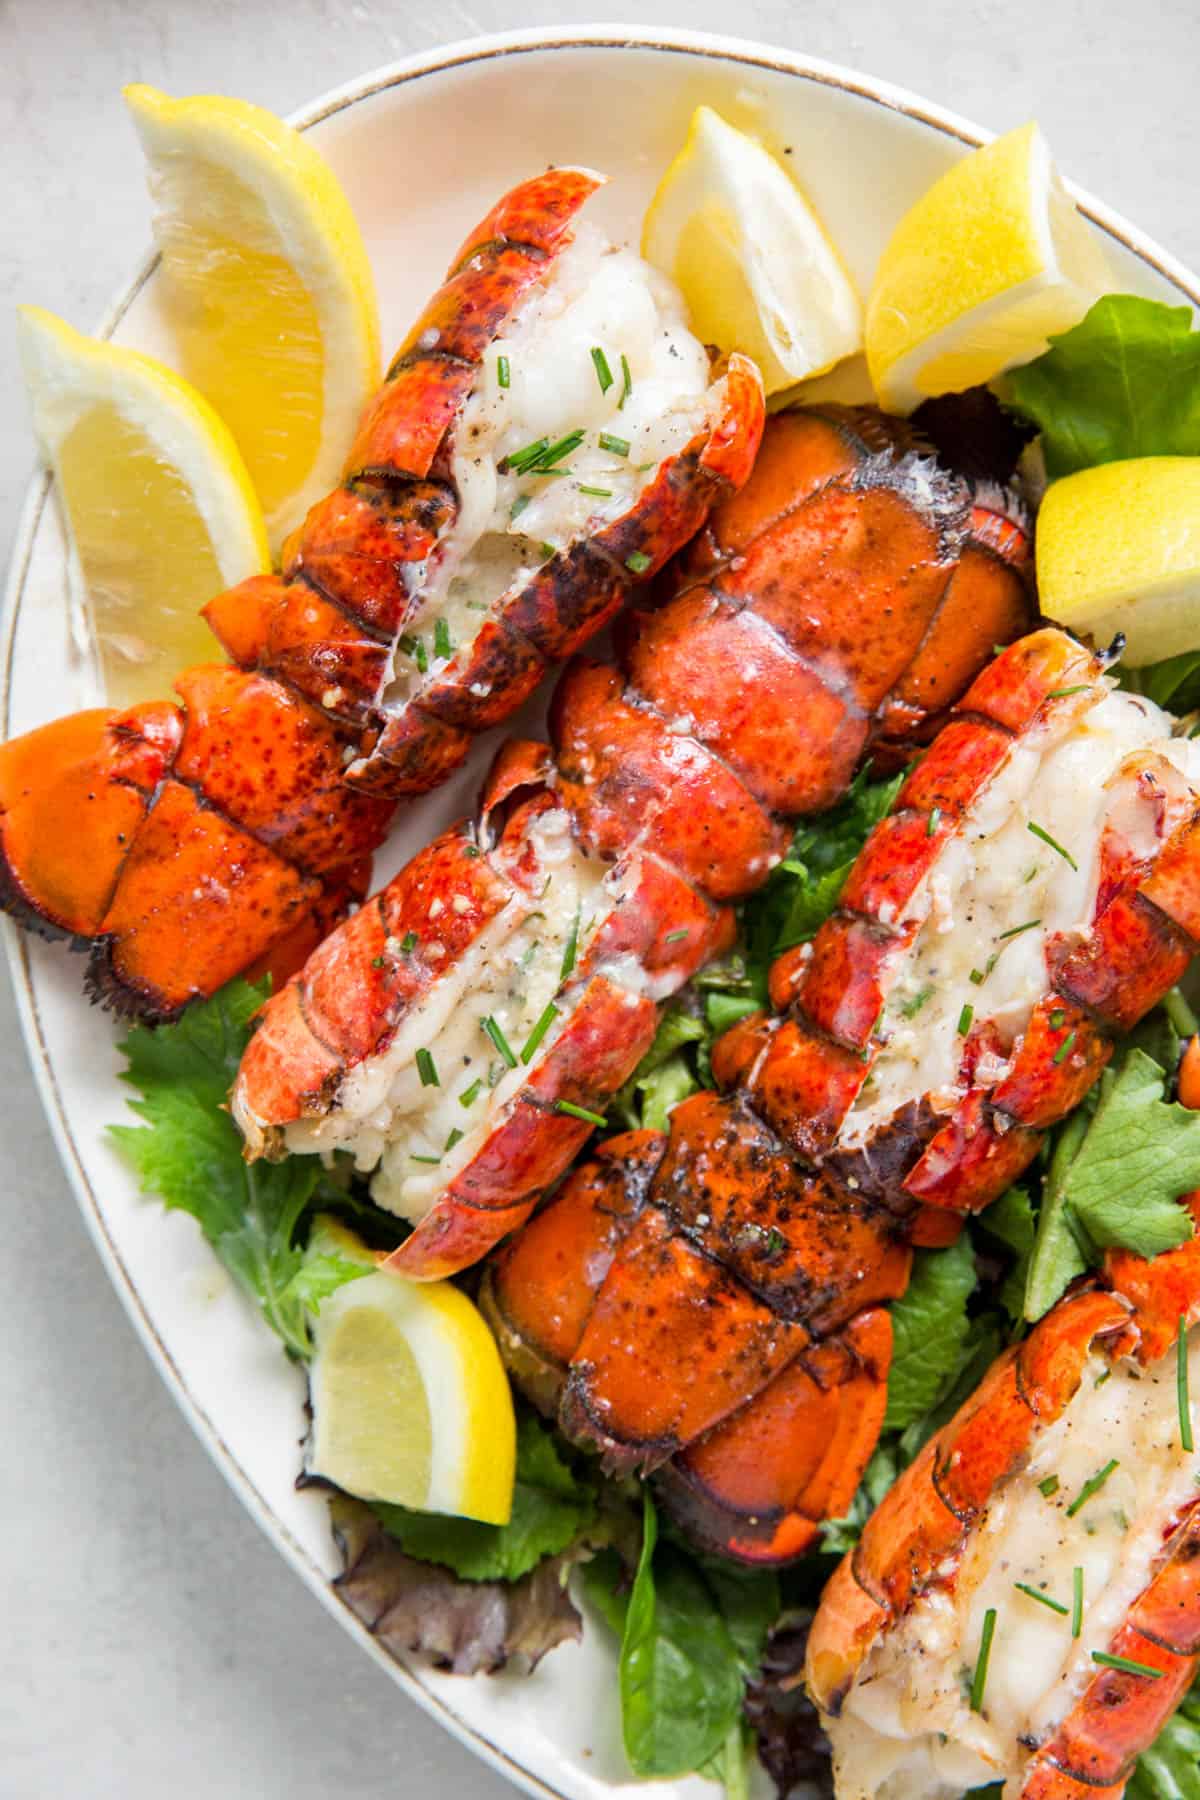 Four grilled lobster tails on a bed of lettuce on a plate with lemon wedges.